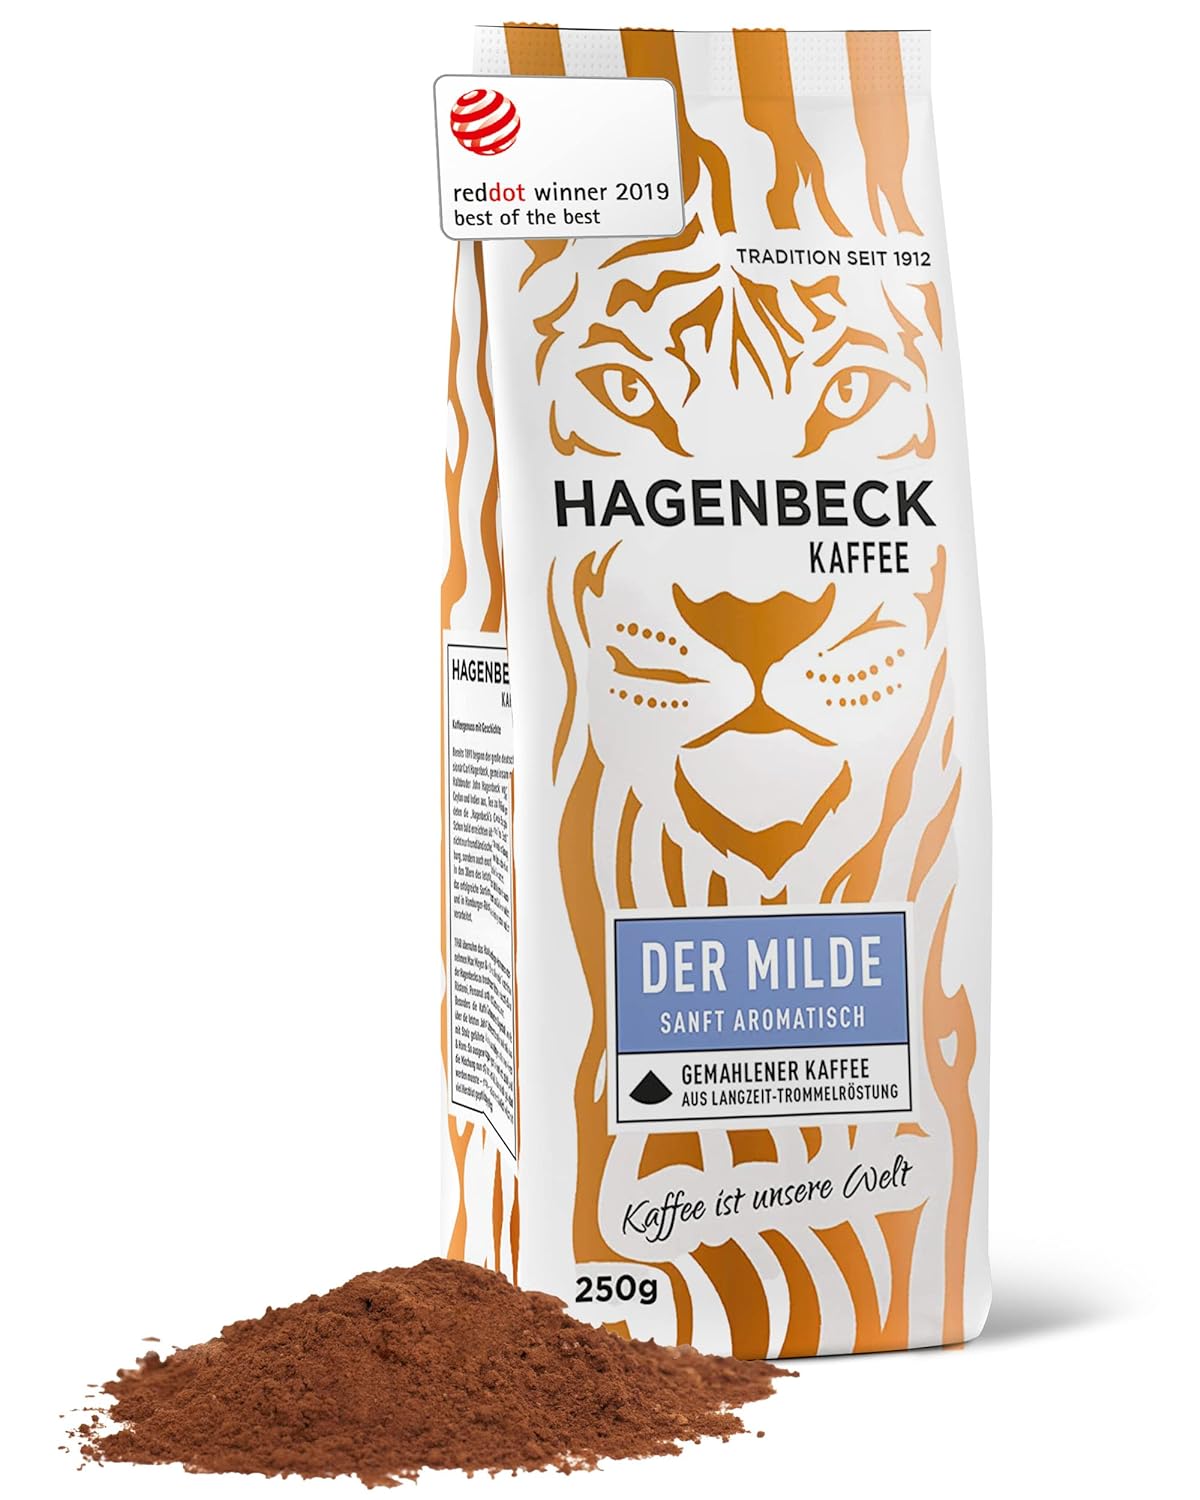 Hagenbeck Der Milde 250g | Ground coffee with a mild, fine character | 100% Arabica blend from particularly gentle roasting | Light Intensity | Coffee beans ground with little acidity